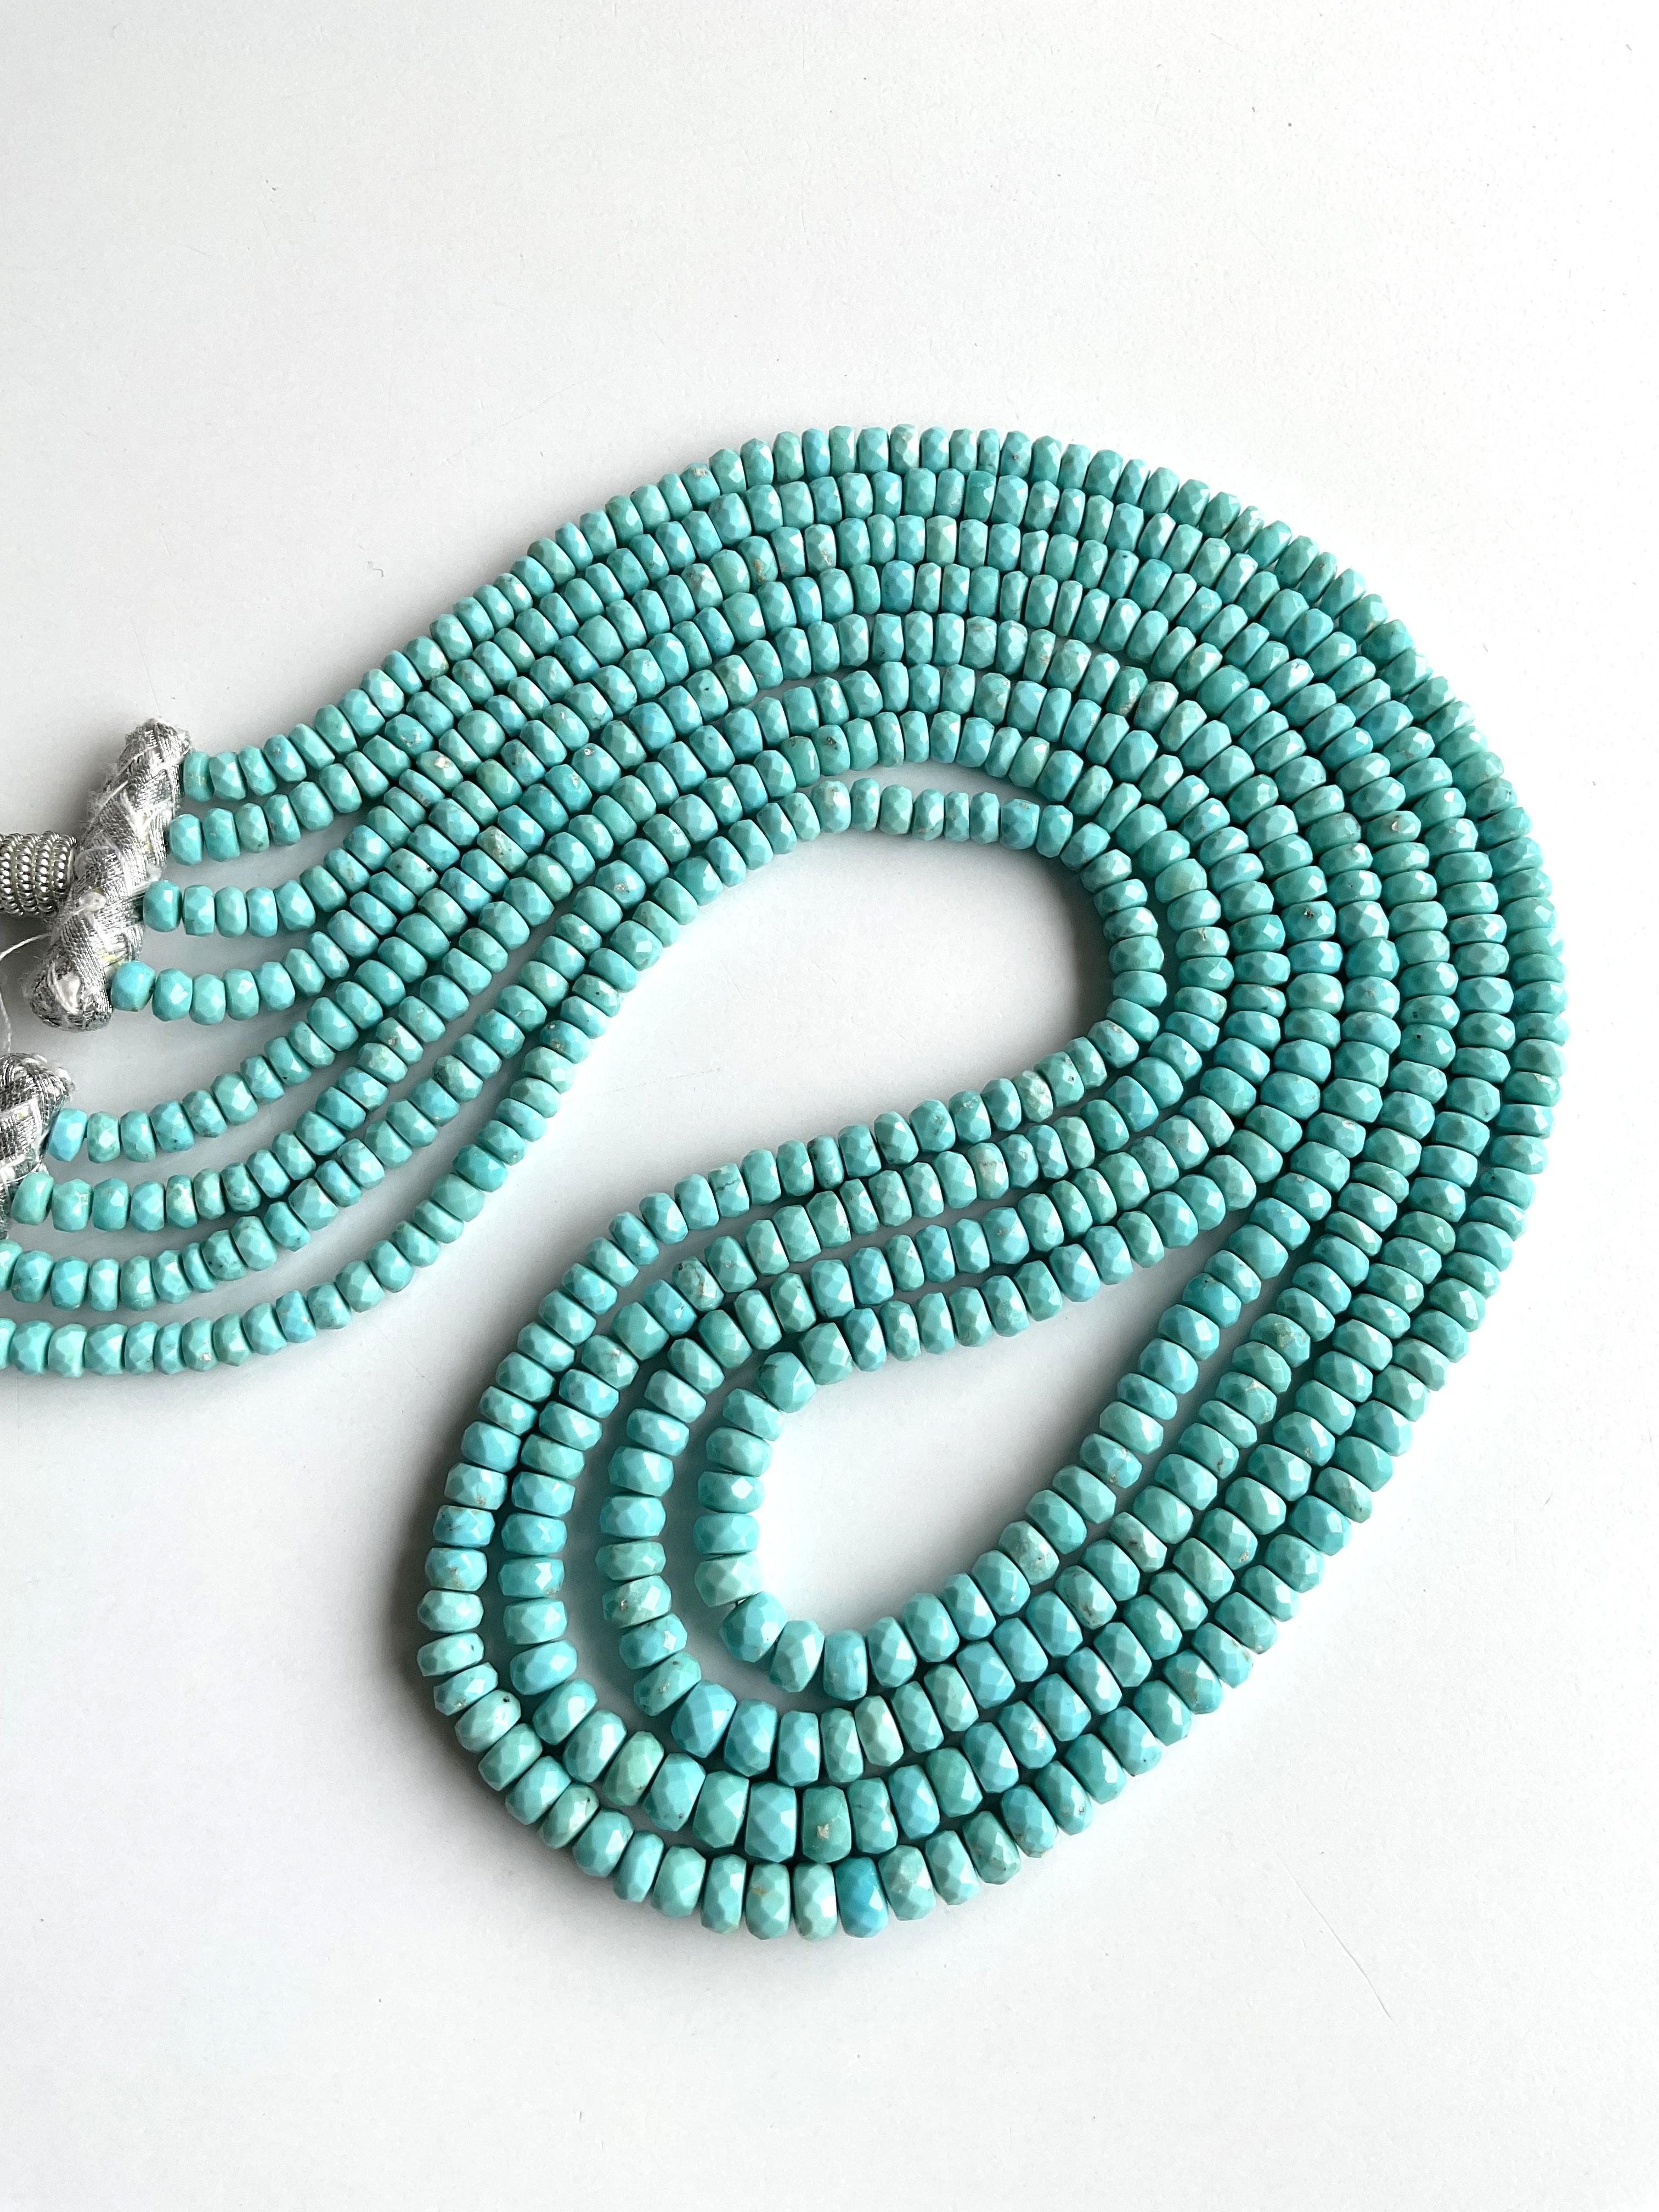 273.62 Carats Turquoise Jewelry Beaded Faceted Necklace Sleeping Beauty Arizona 1